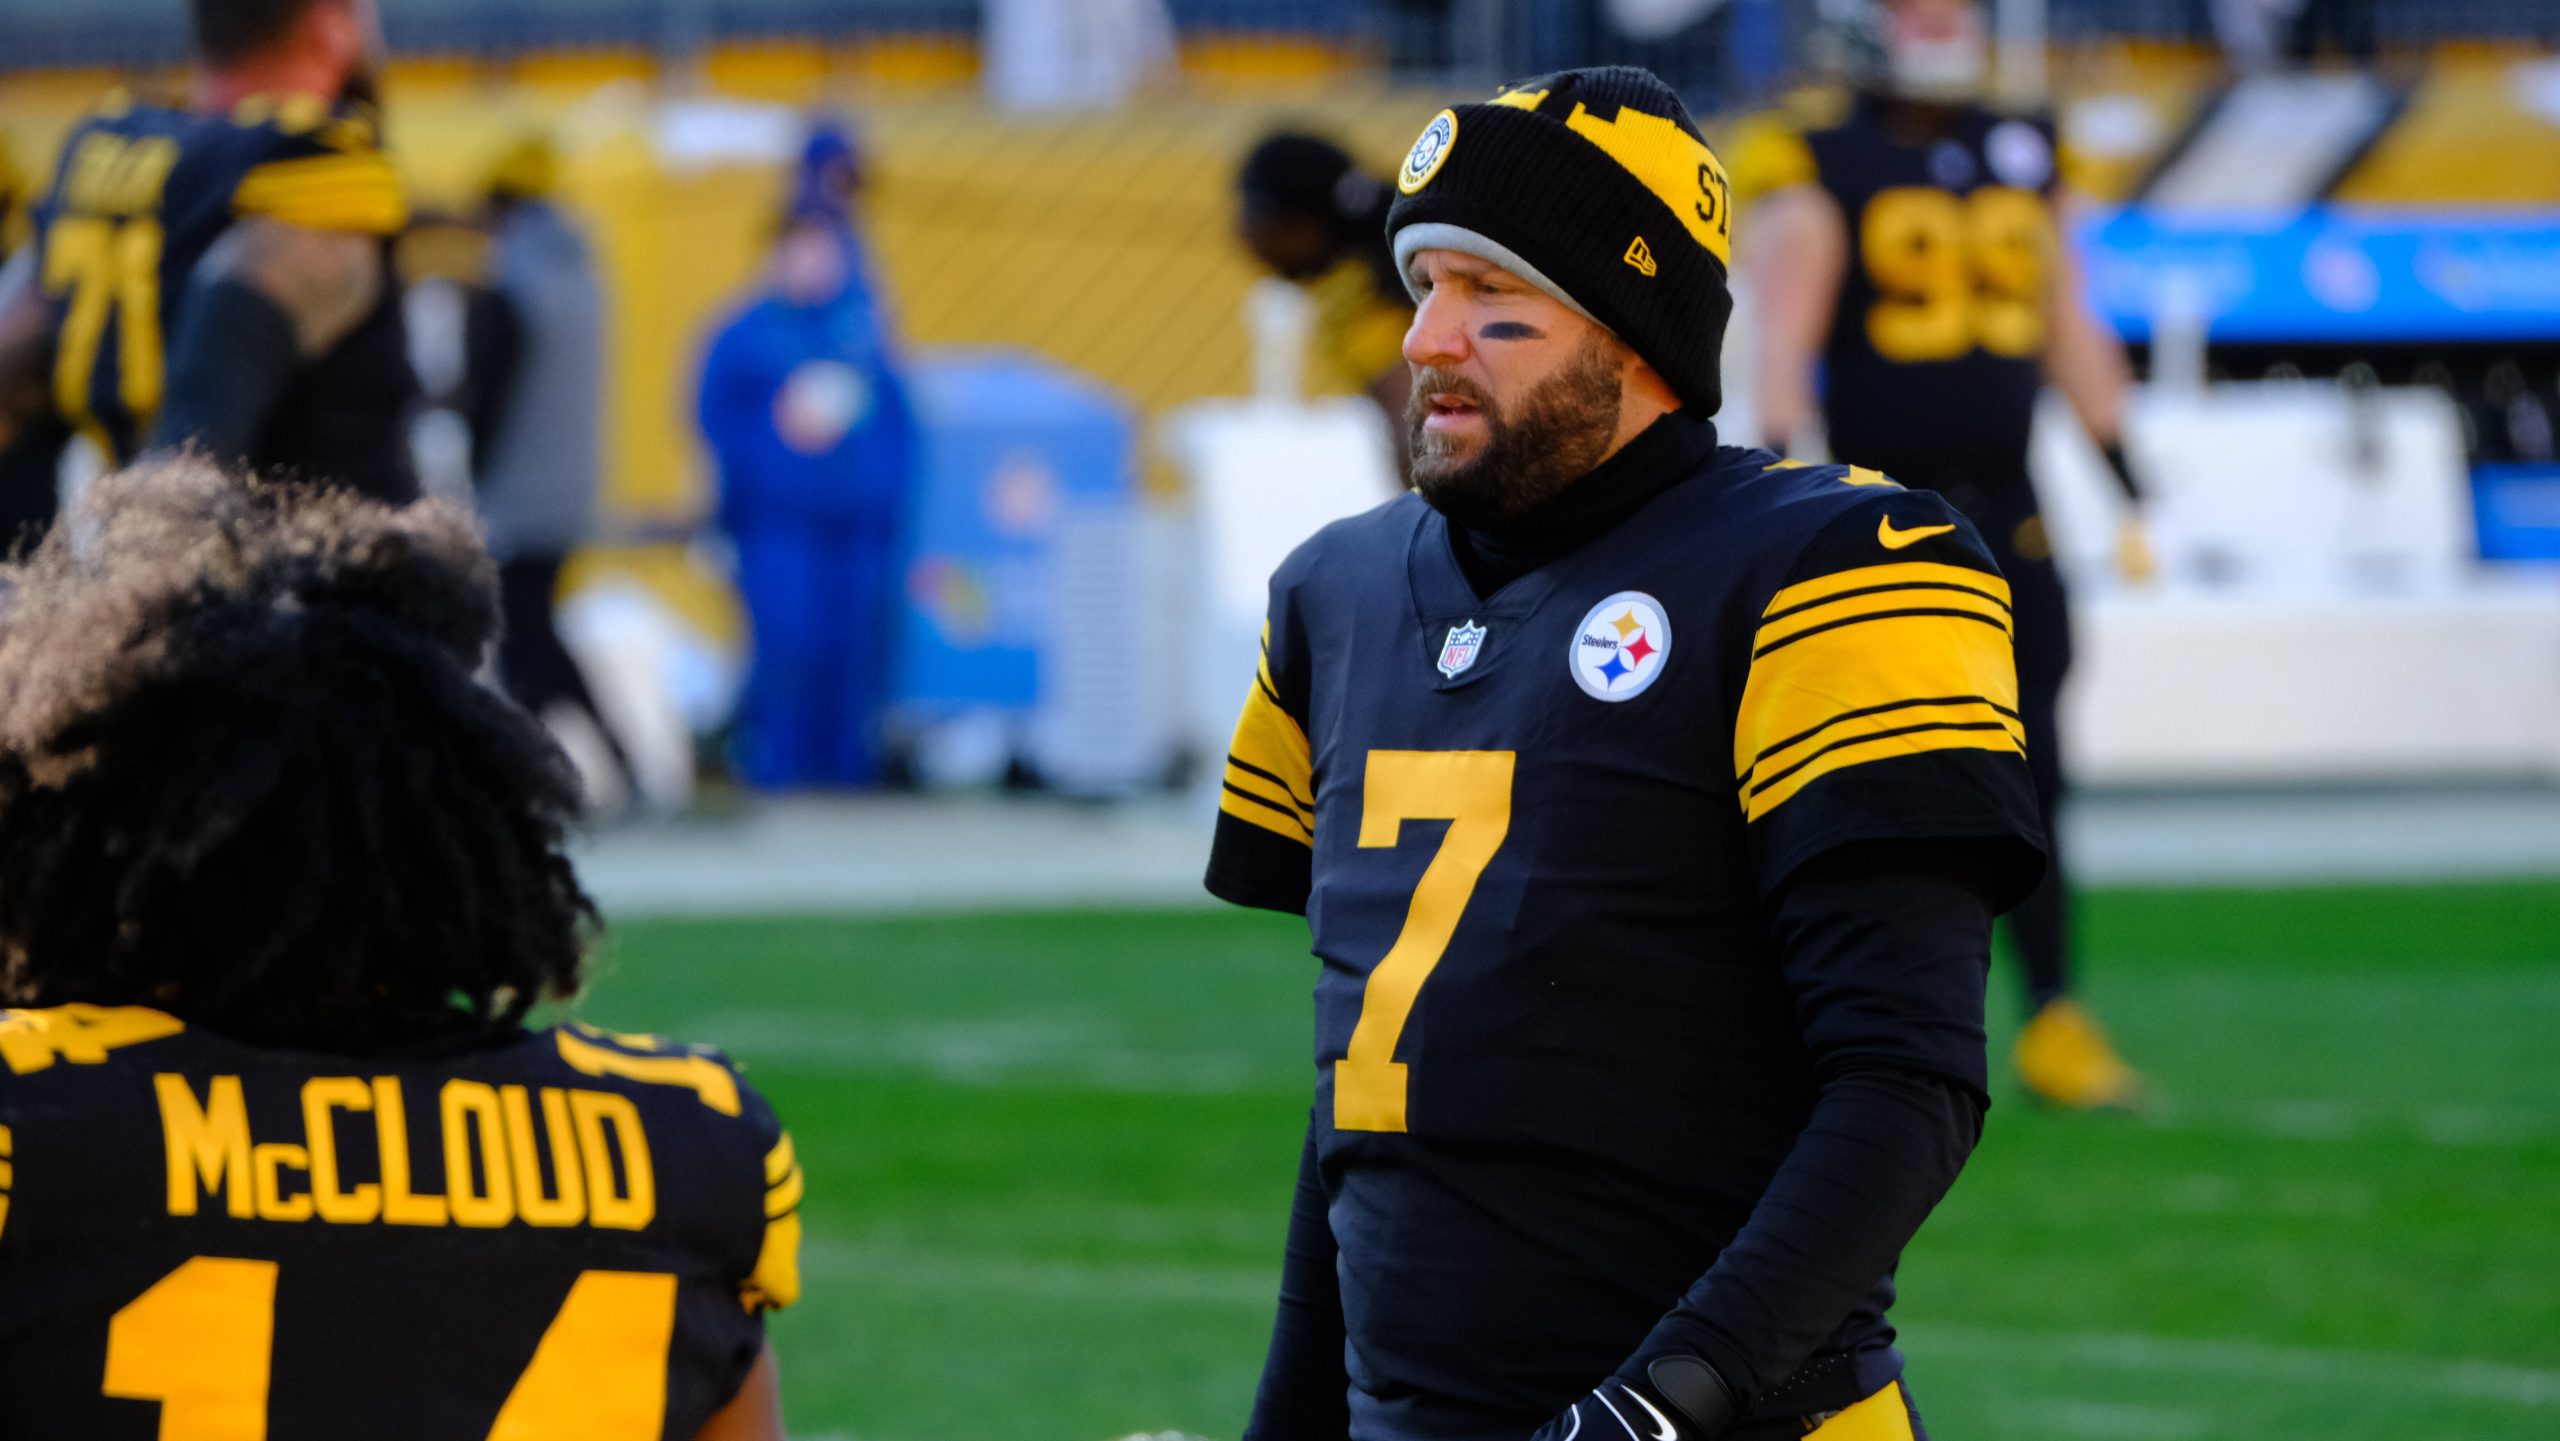 December 2nd, 2020: Ben Roethlisberger 7 during the Pittsburgh Steelers vs Baltimore Ravens game at Heinz Field in Pitts